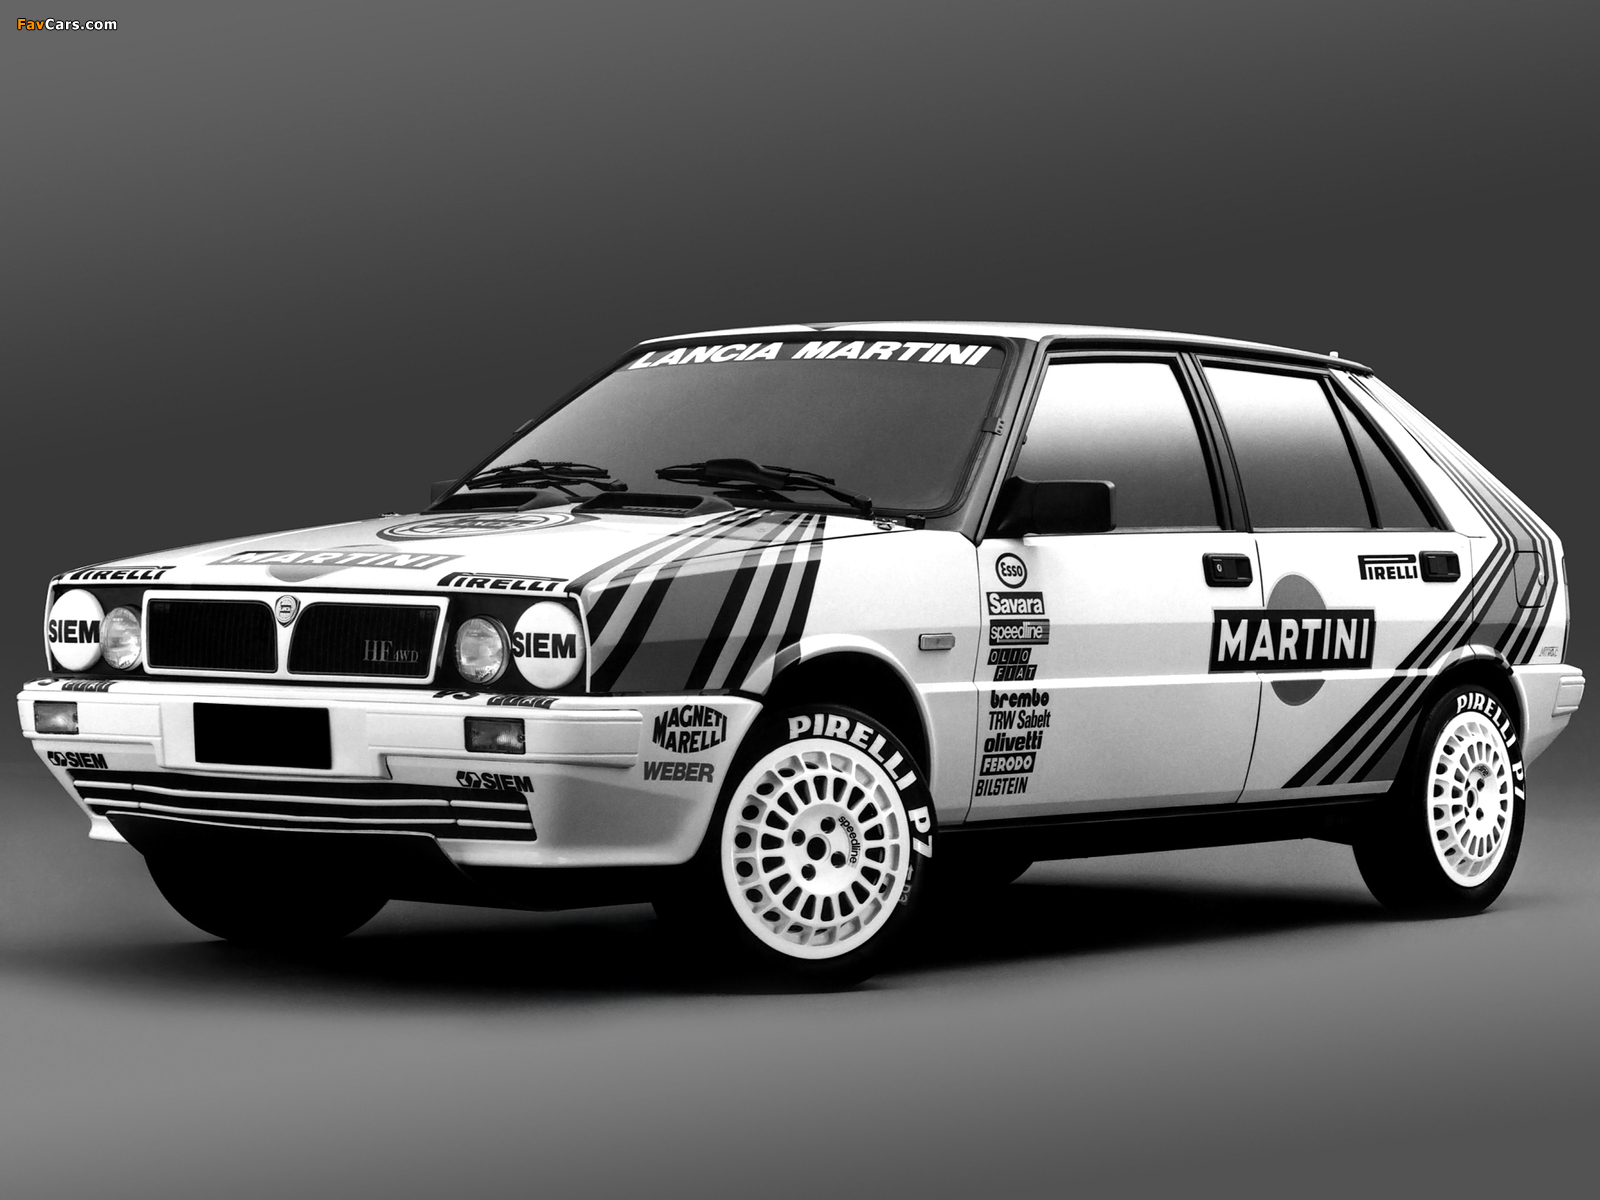 Lancia Delta HF 4WD Gruppo A SE043 (1987) pictures (1600 x 1200)